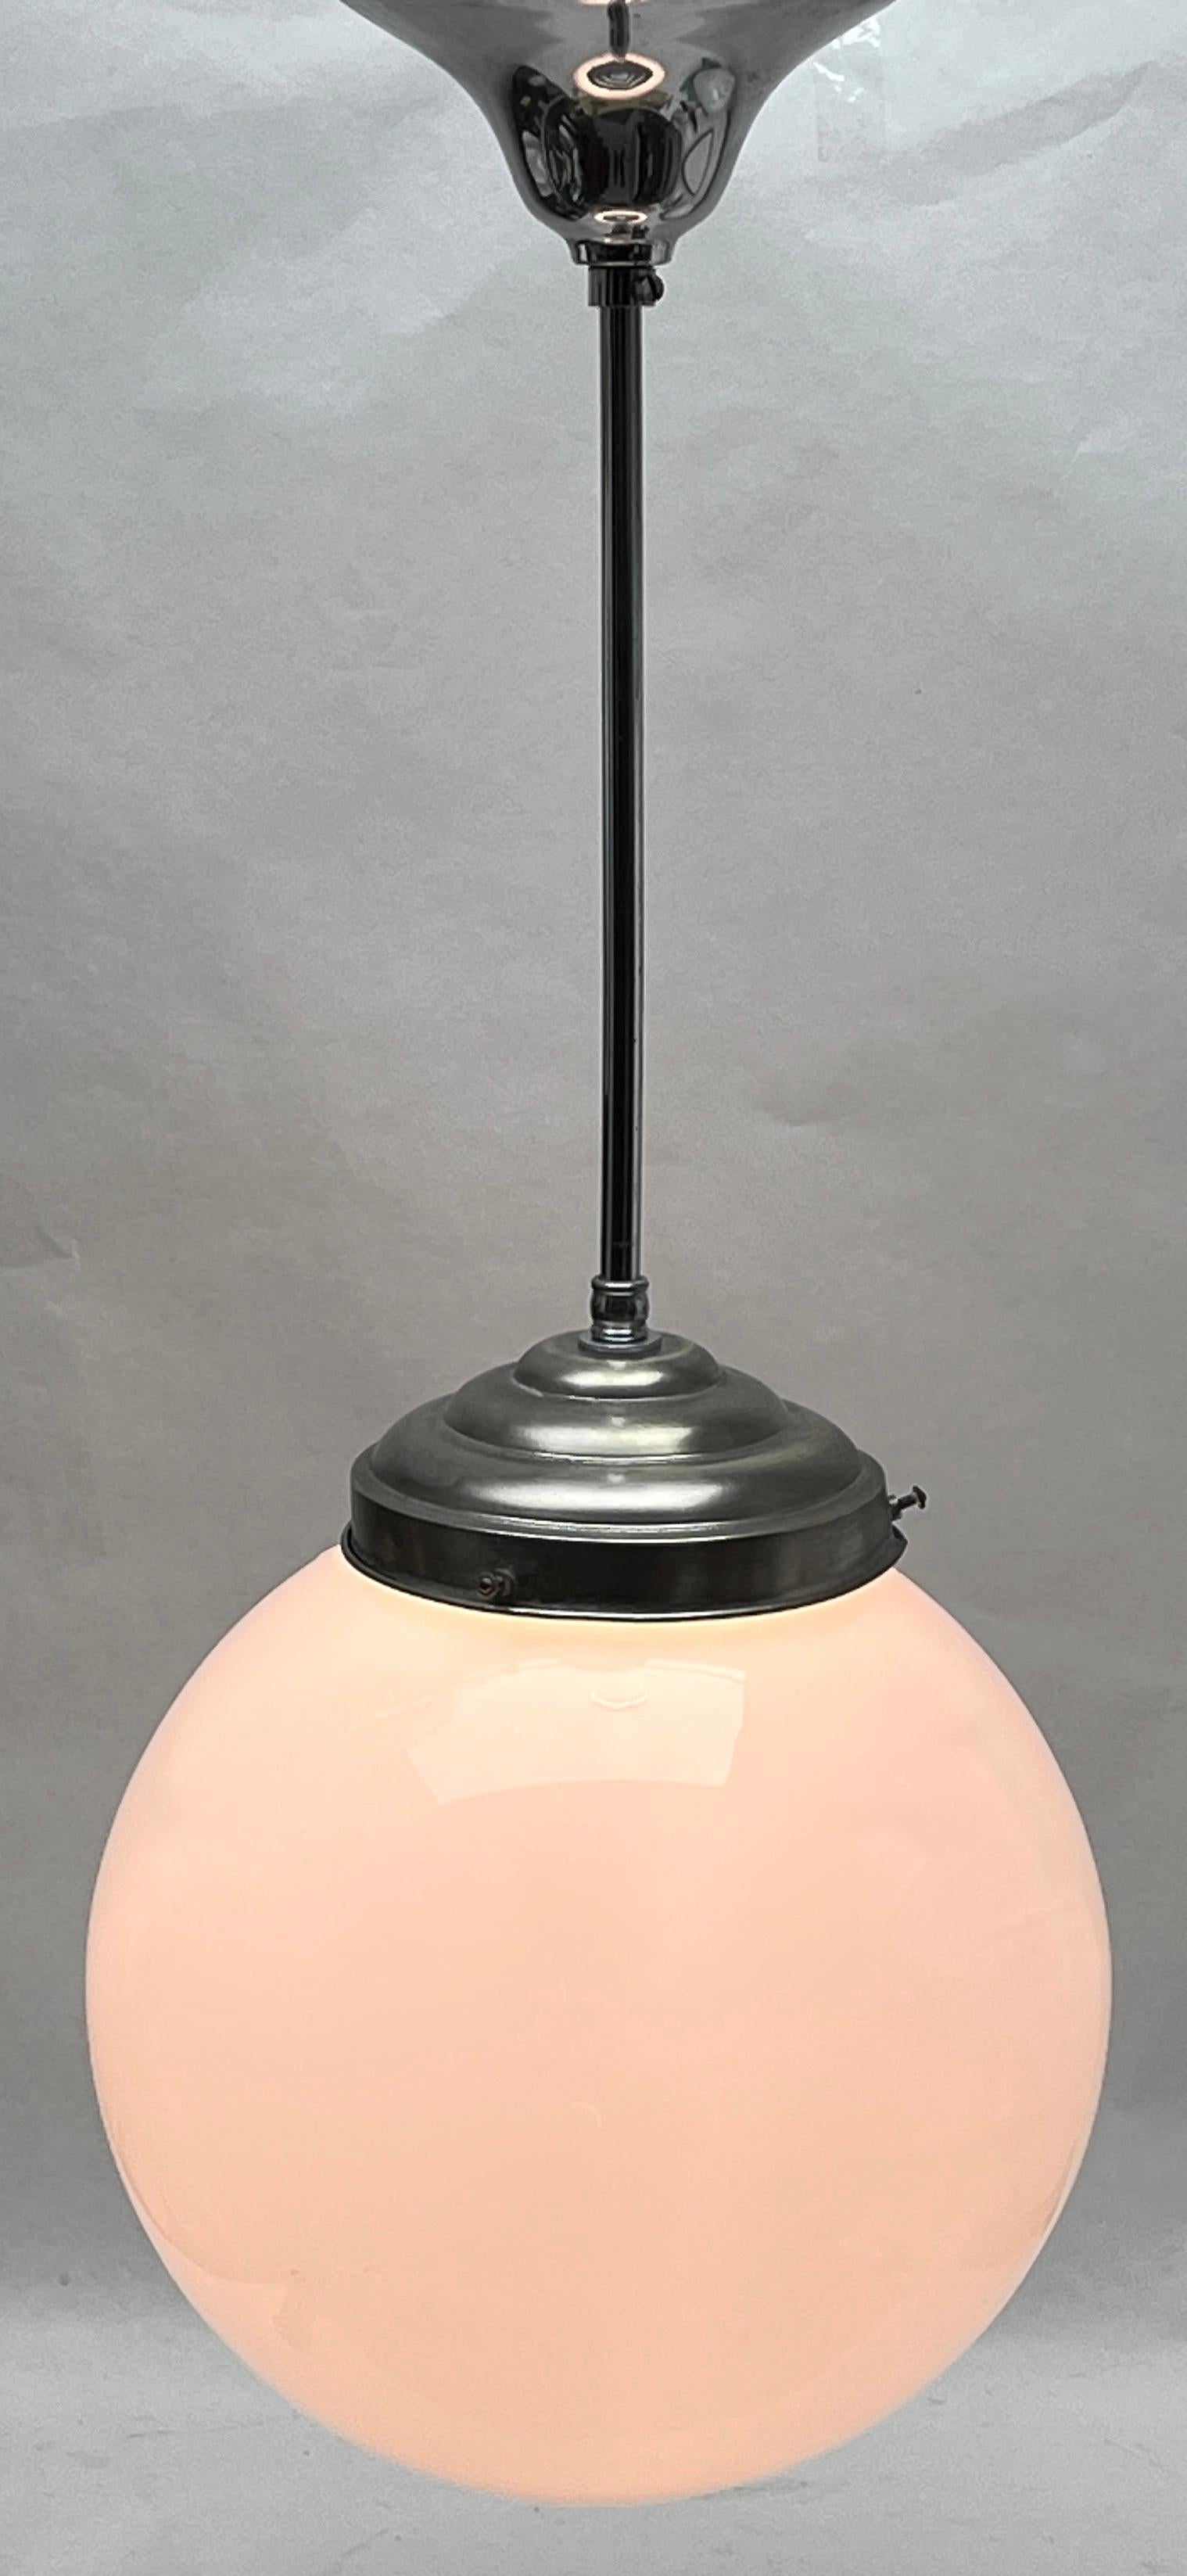 Phillips Pendant Stem Lamp with a Globular Opaline Shade, 1930s, Netherlands In Good Condition For Sale In Verviers, BE